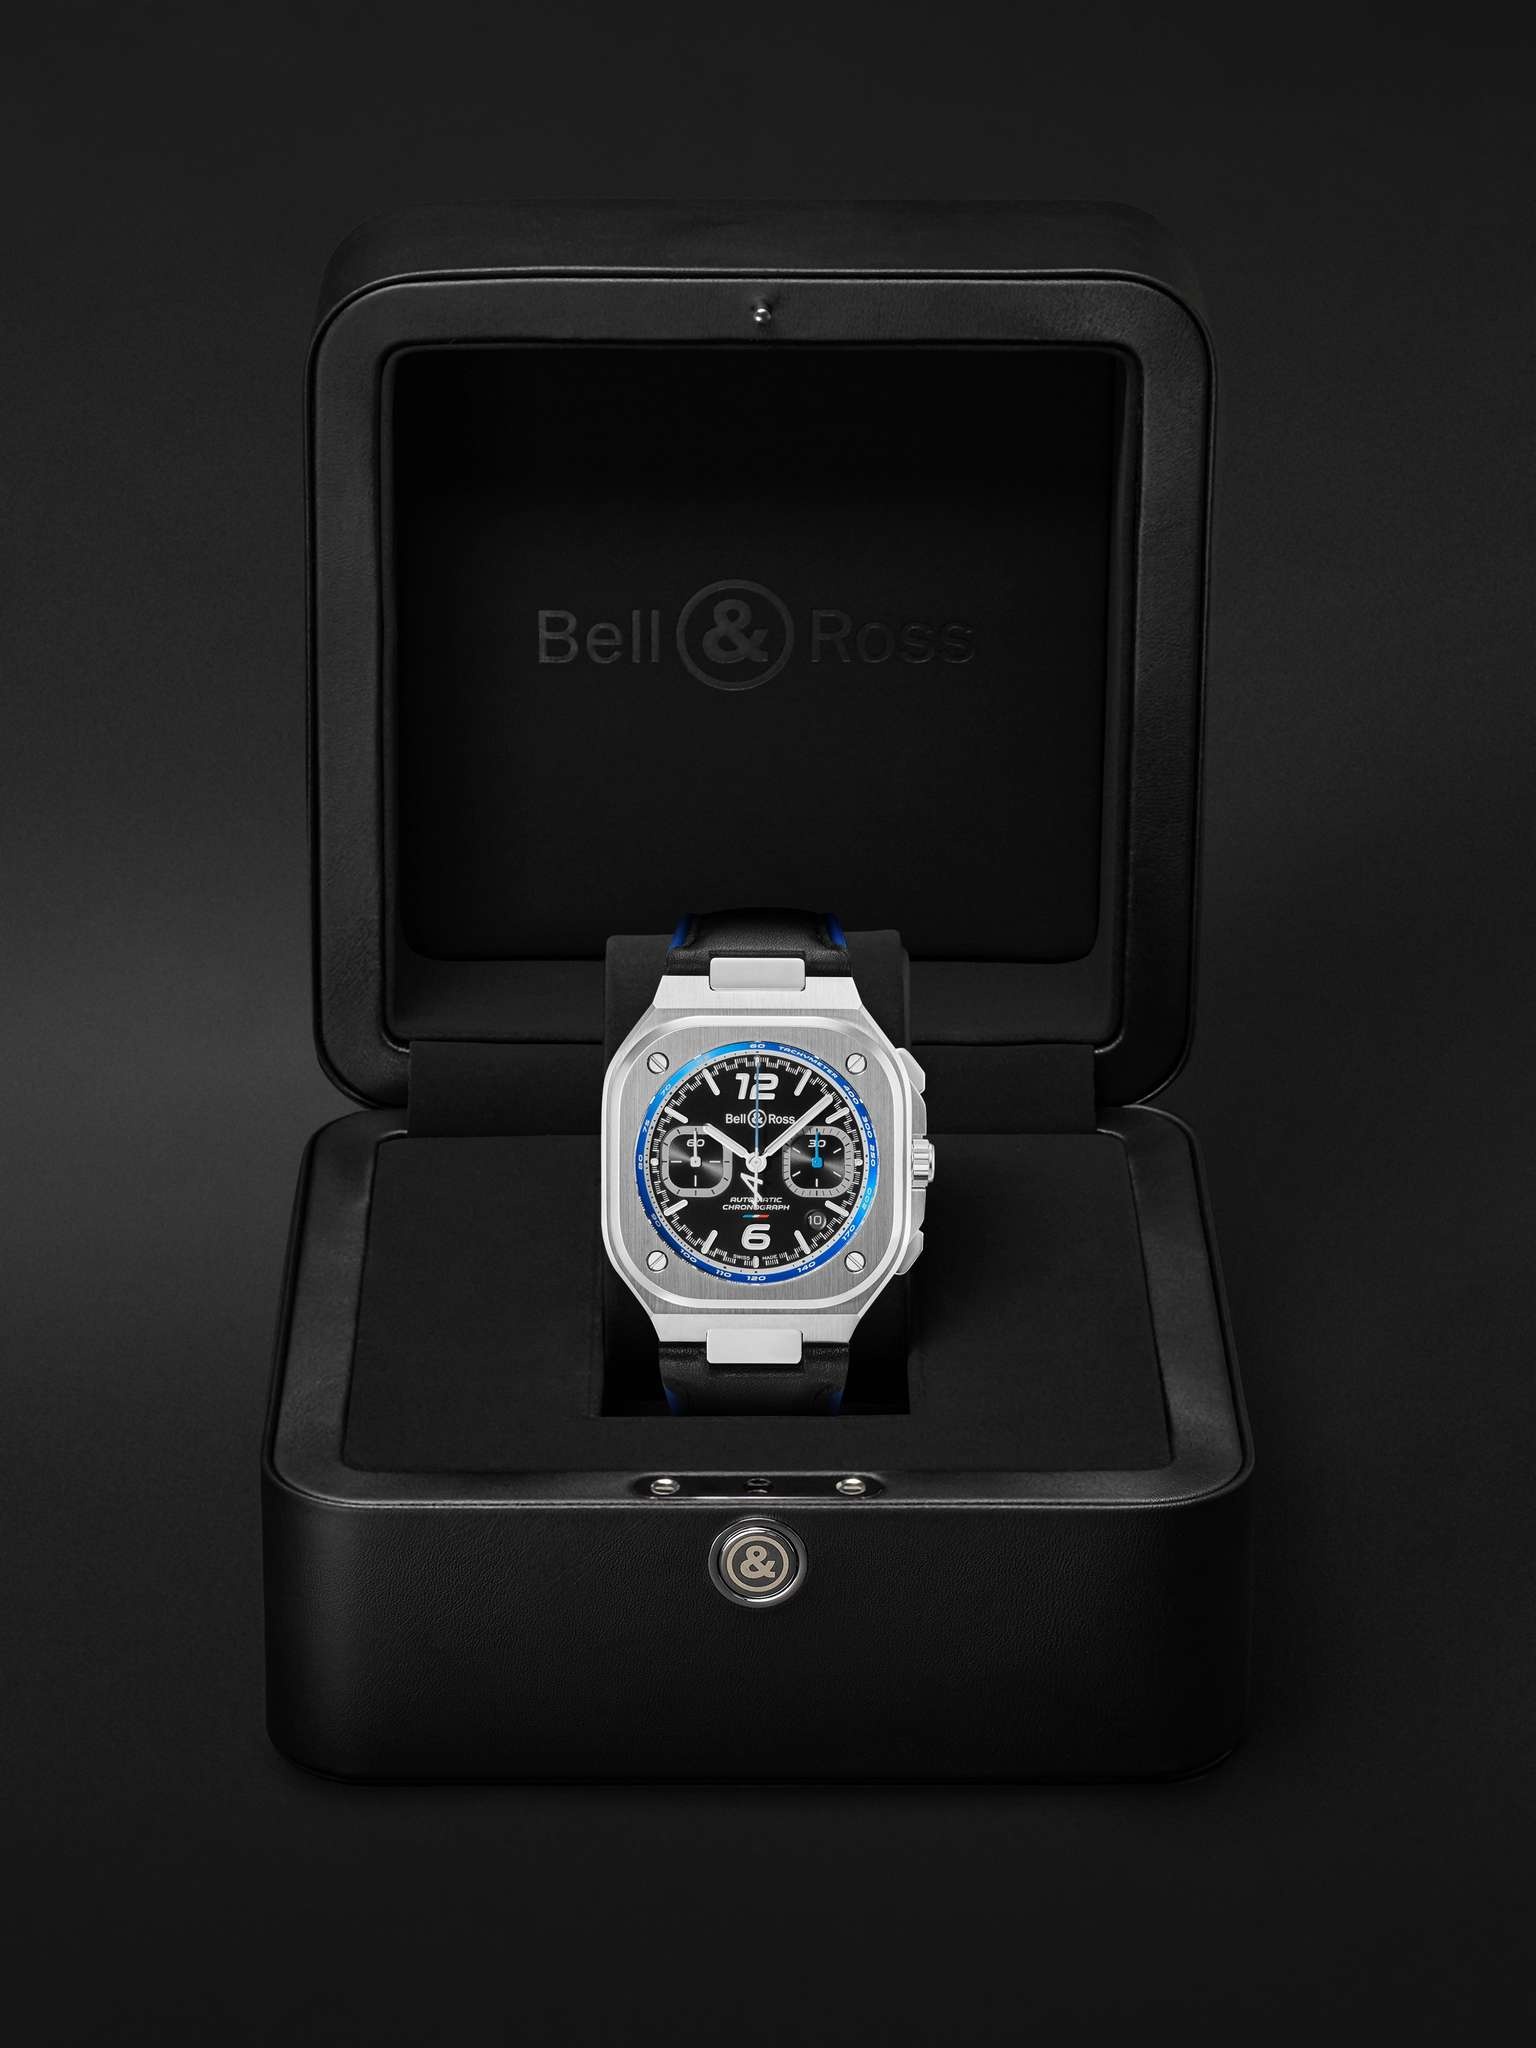 BR 05 Alpine Automatic Chronograph 42mm Stainless Steel and Leather Watch, Ref. No. BR05C-A523-ST/SC - 8